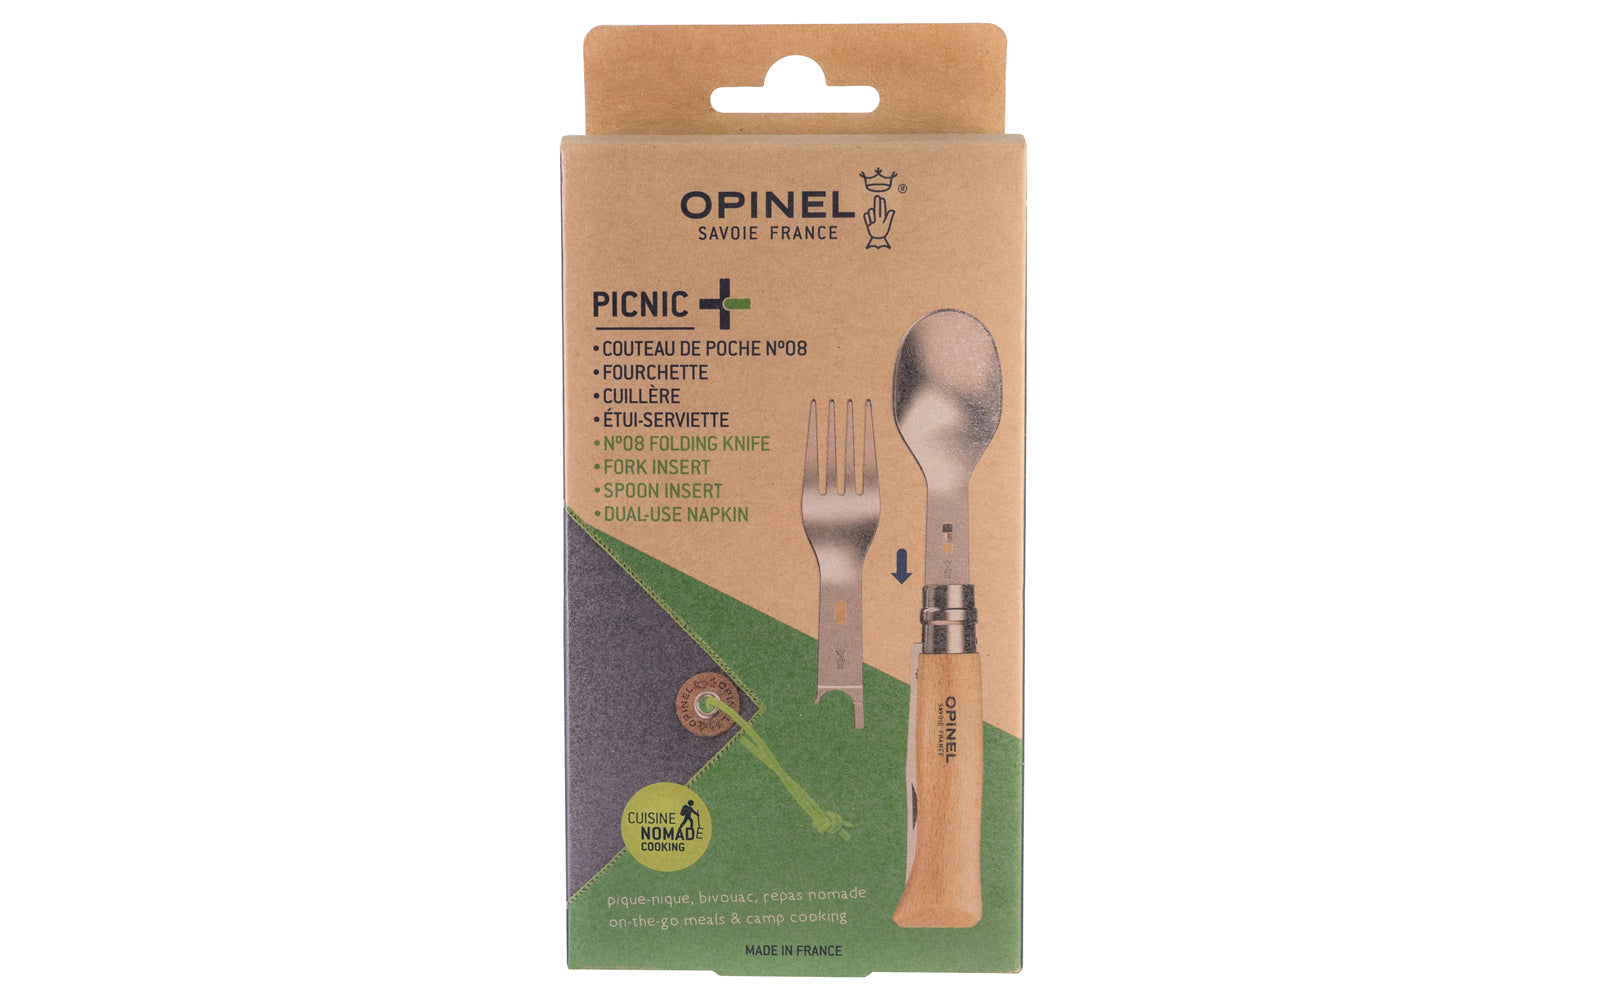 Made in France · Opinel Stainless Steel No. 8 Knife + Picnic Kit. Opinel Stainless Steel No. 8 Knife + Picnic Kit. The Picnic+ cutlery inserts are smart & durable accessories for on the go meals & camp cooking. Perfect for hiking, weekend picnics, or just everyday lunches. Includes fork & spoon inserts to fit in knife.